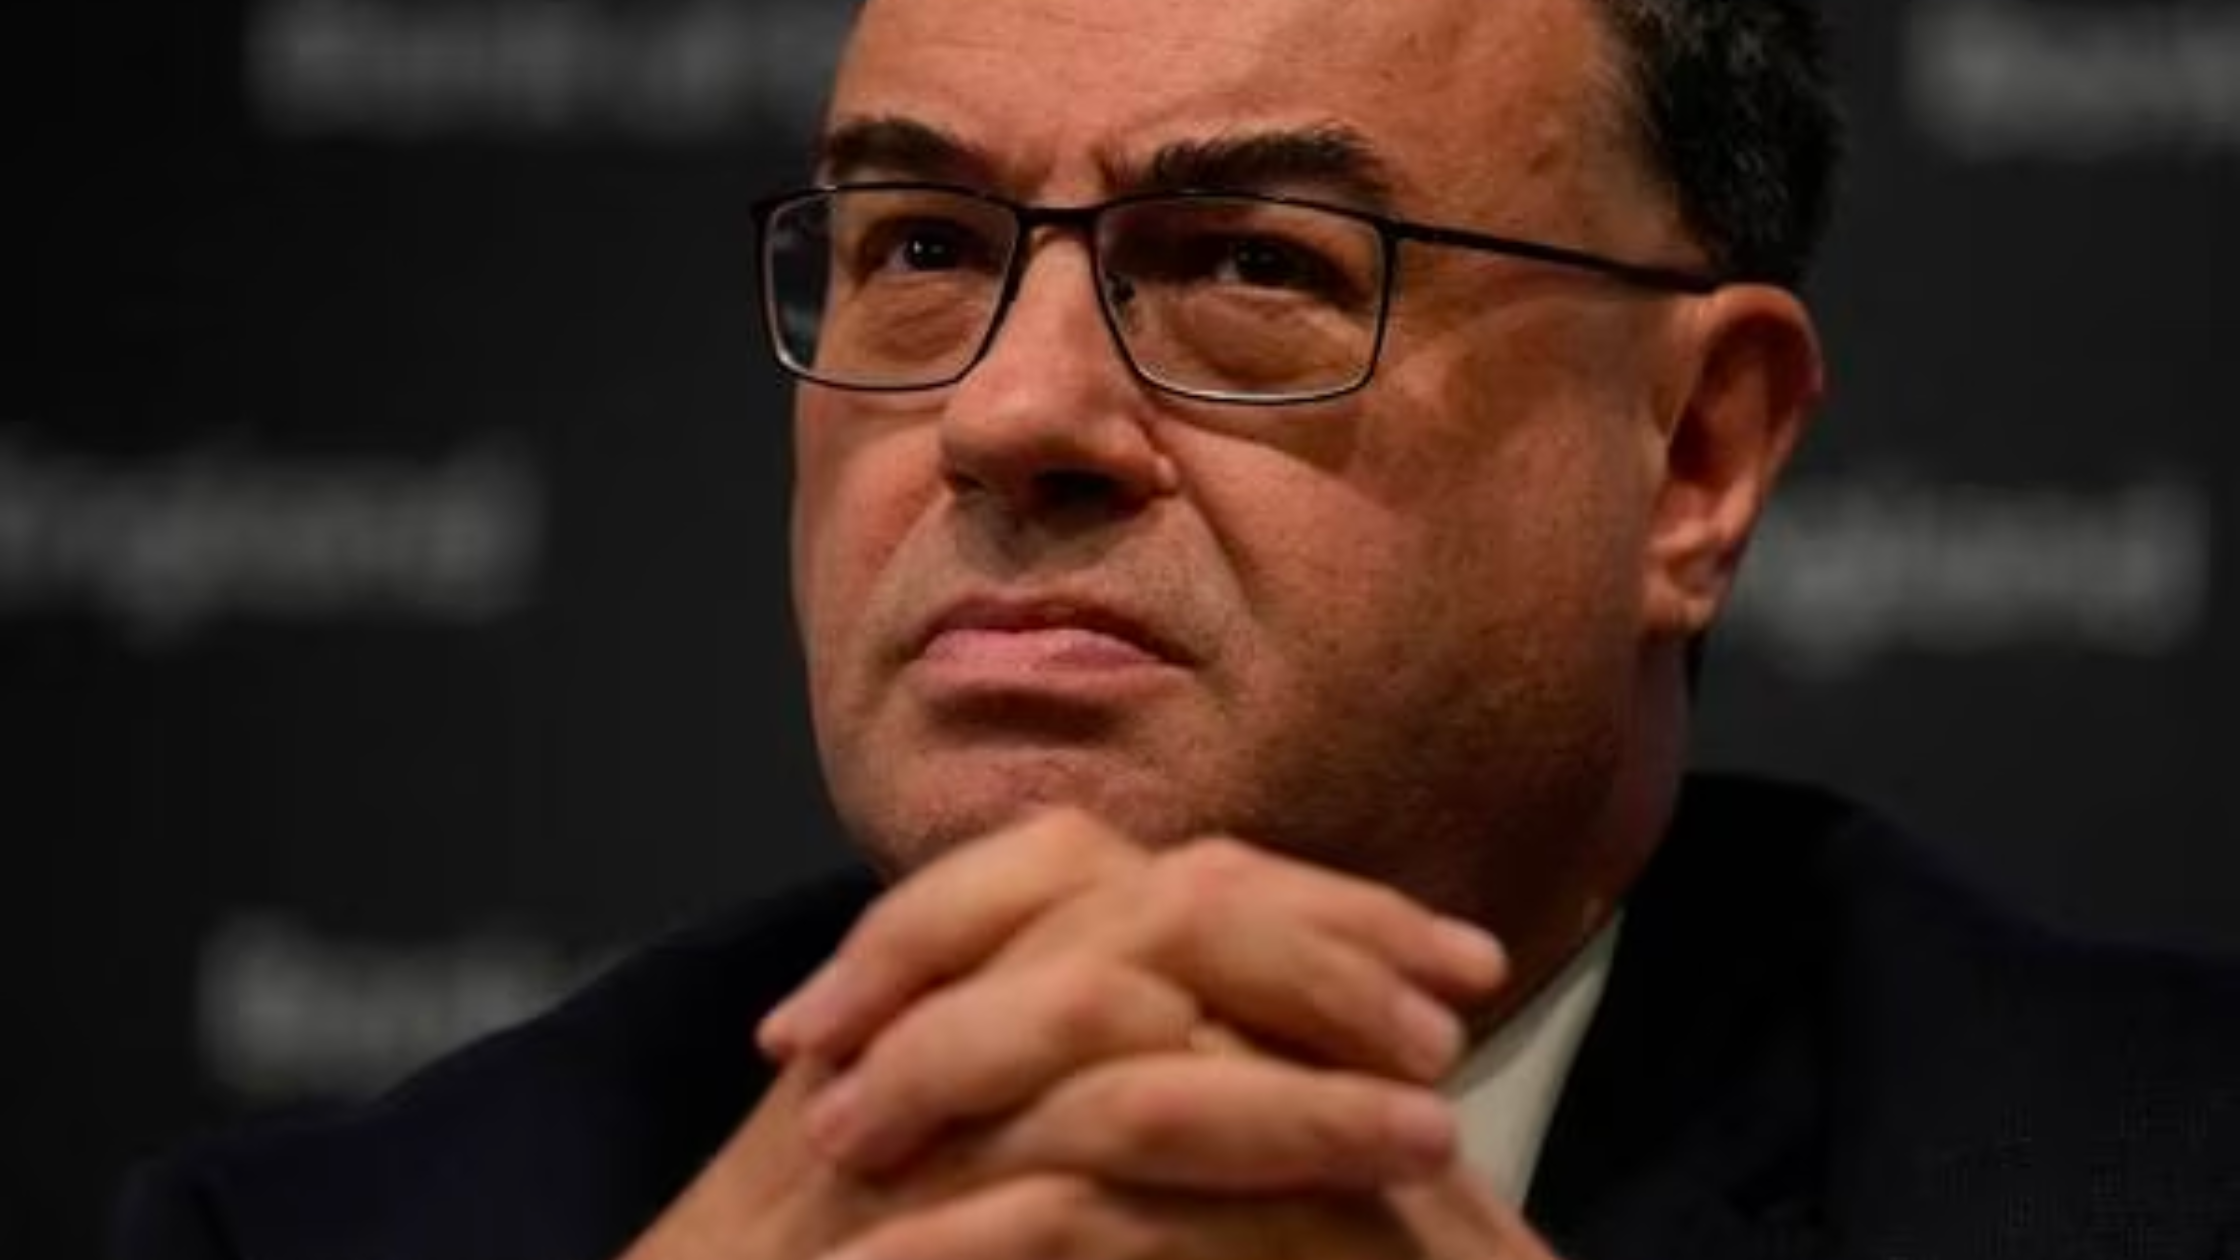 Bank of England Governor, Andrew Bailey, informed Parliament that the UK is drawing closer to the peak level of interest rates, although he cautioned about the potential for rising inflation in August due to fuel prices. 